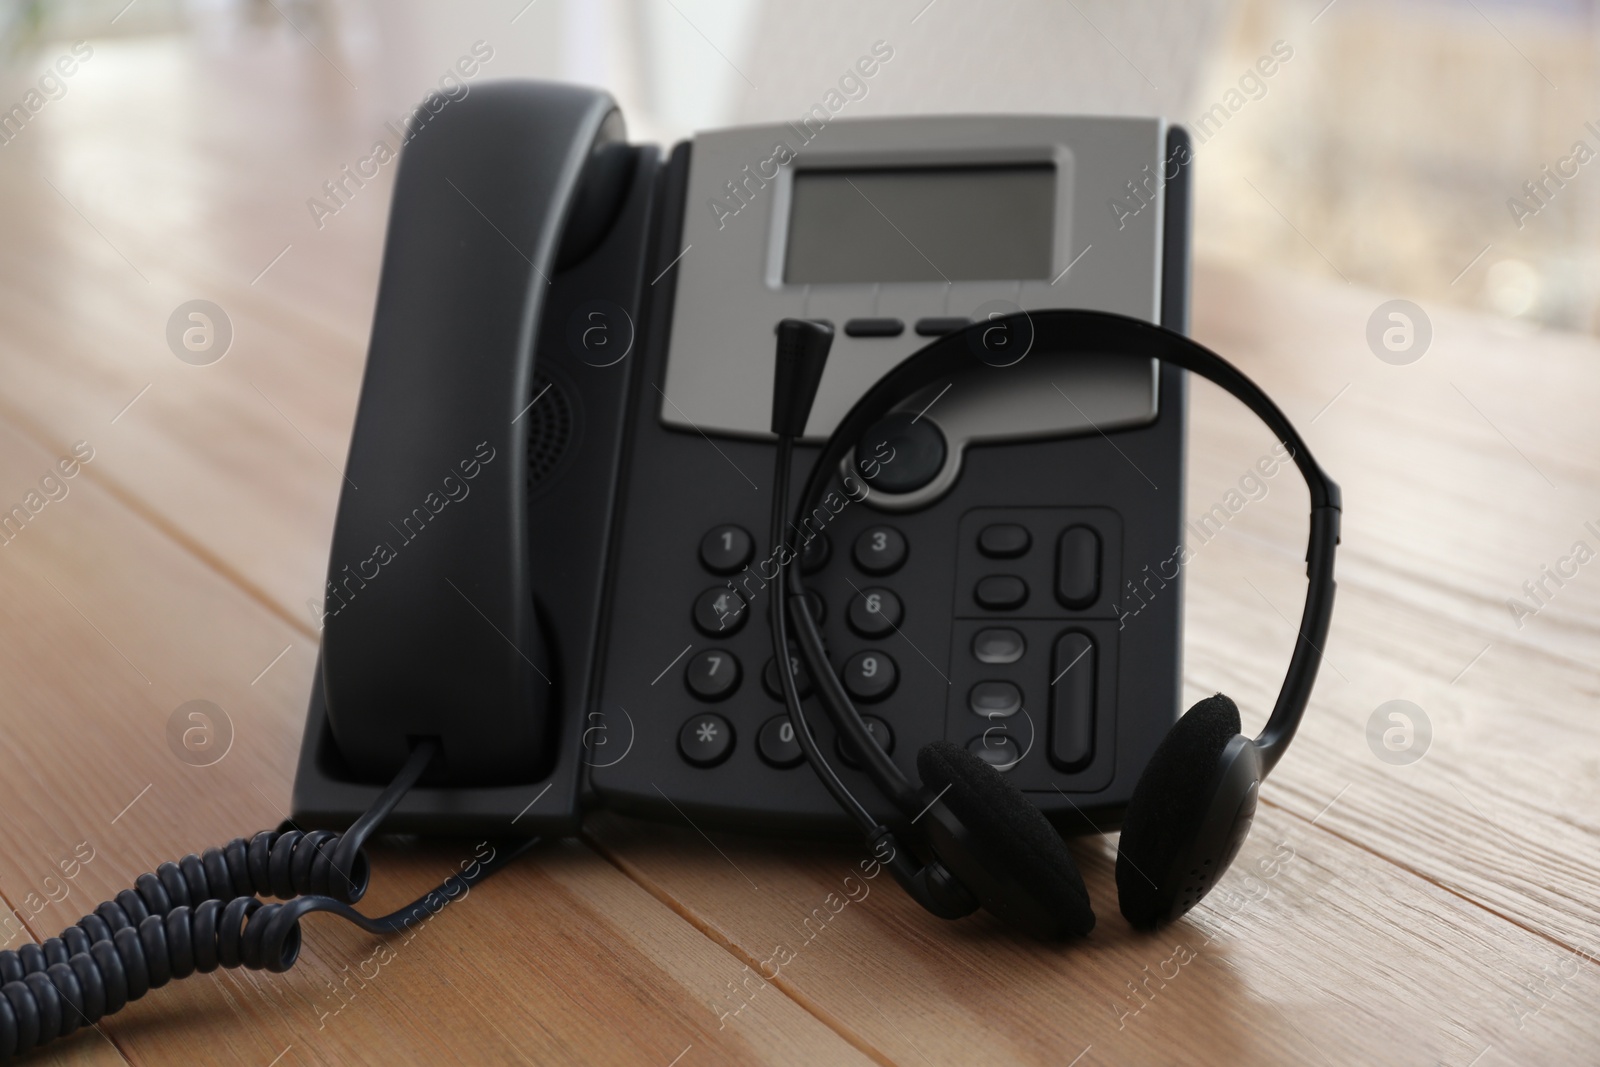 Photo of Office desktop telephone and headset on wooden table. Hotline service